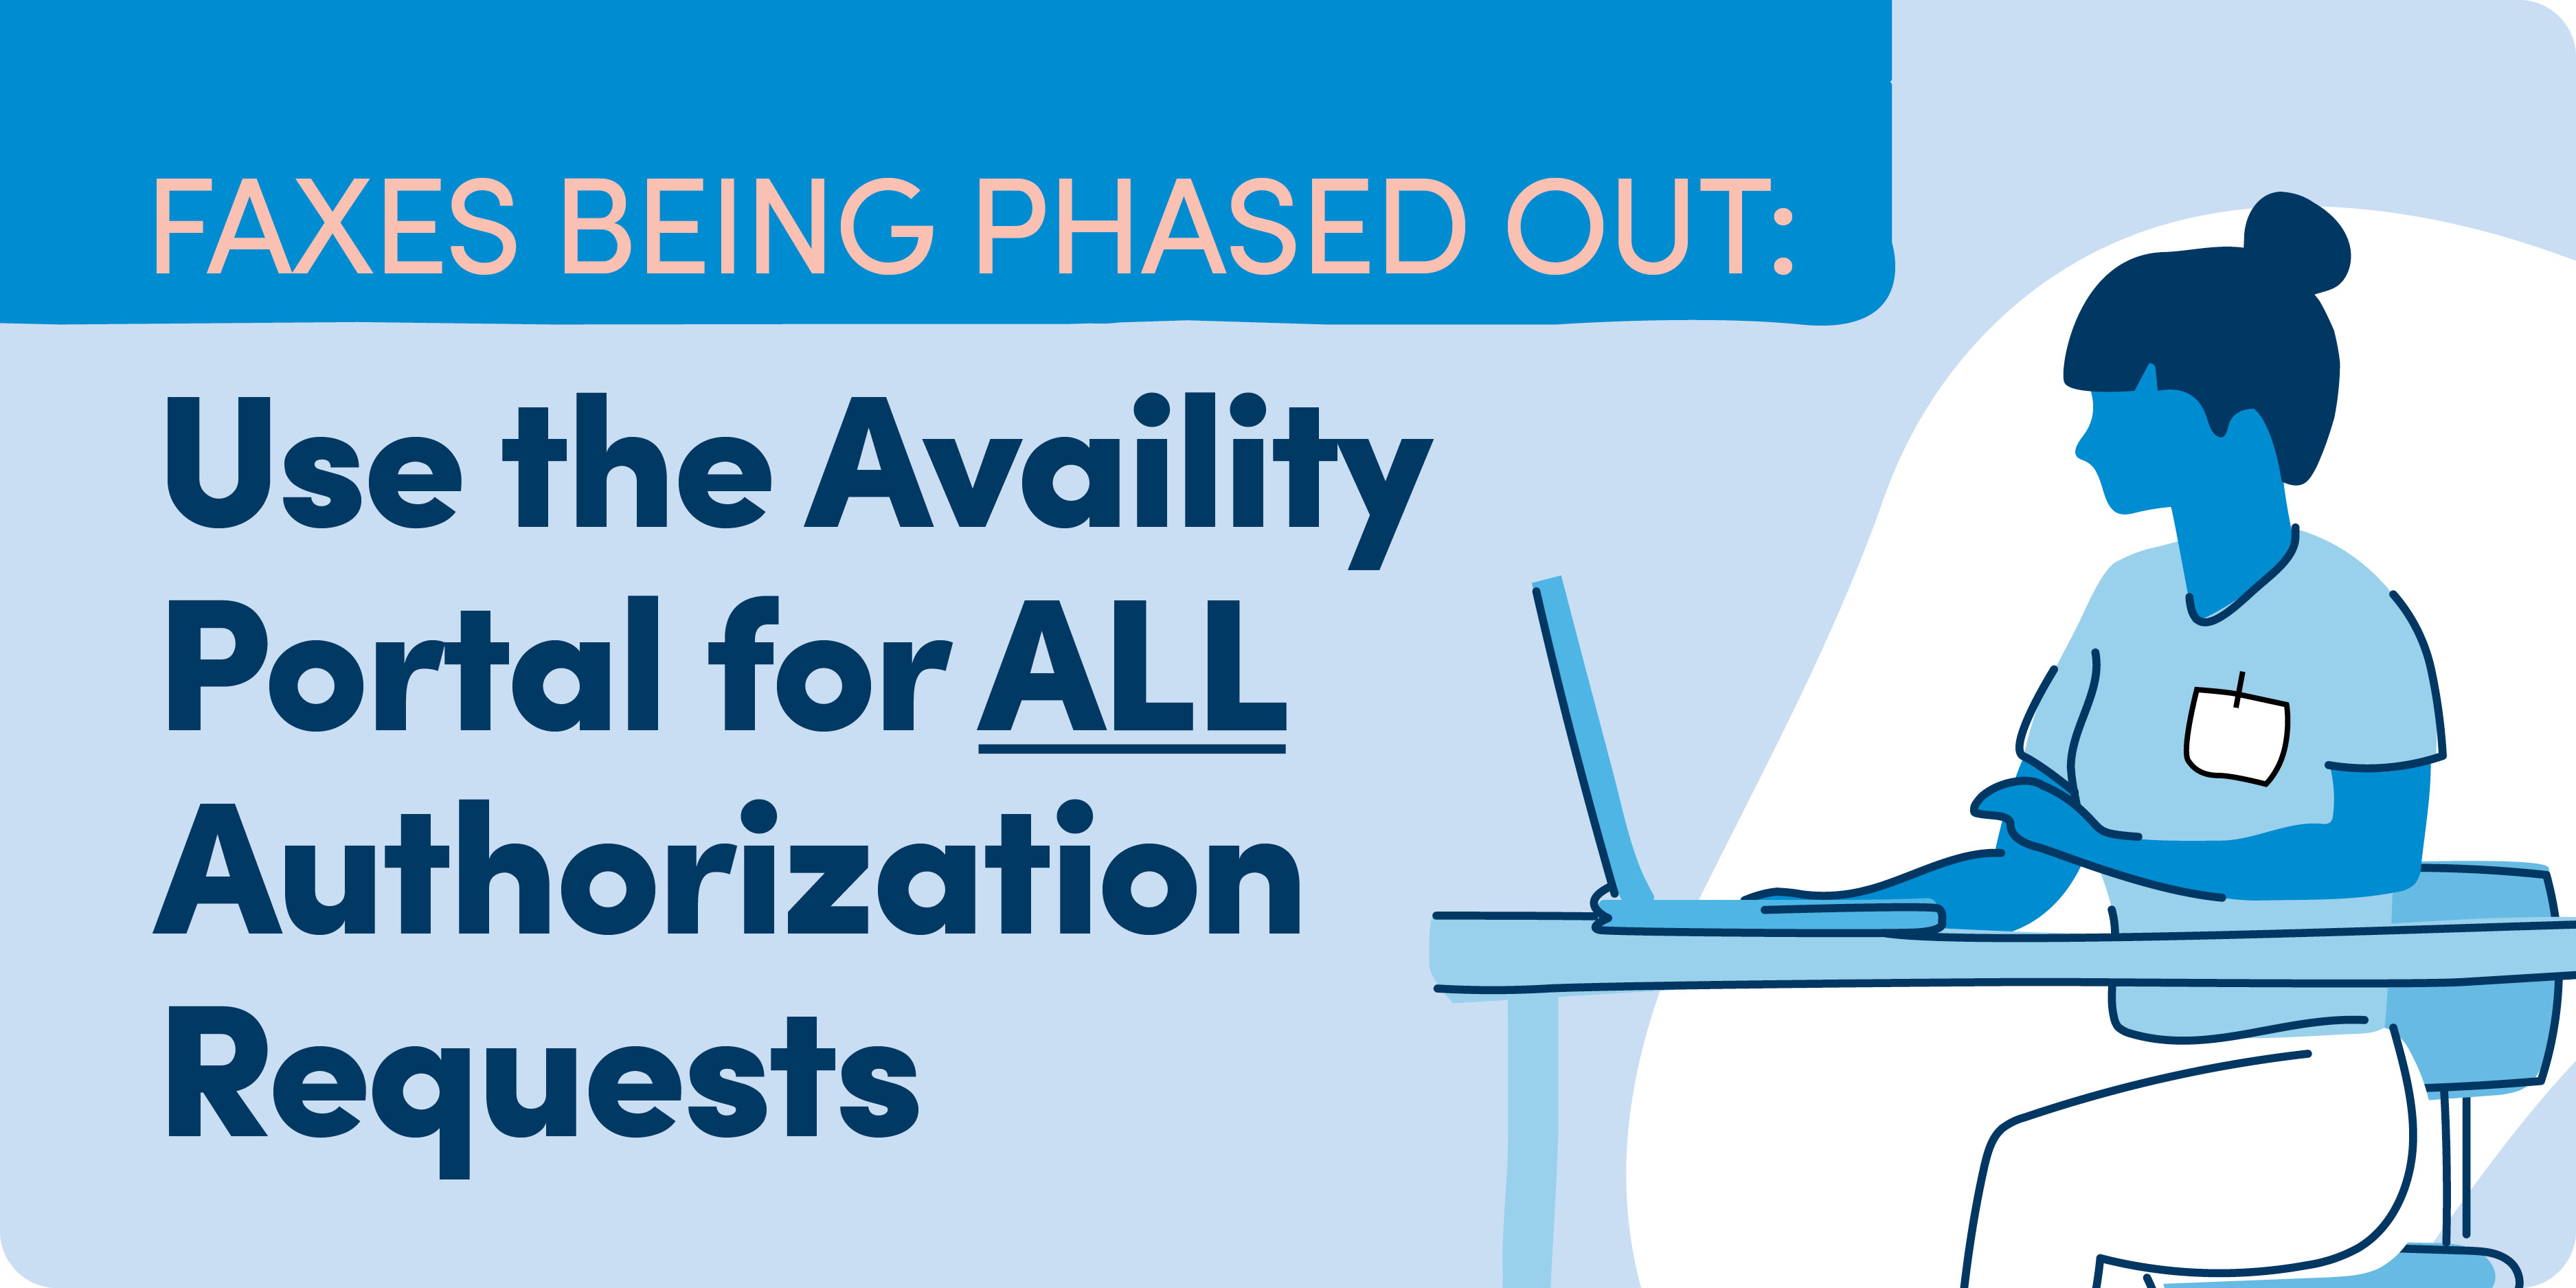 Faxes Being Phased Out: Use the Availity Portal for All Authorization Requests